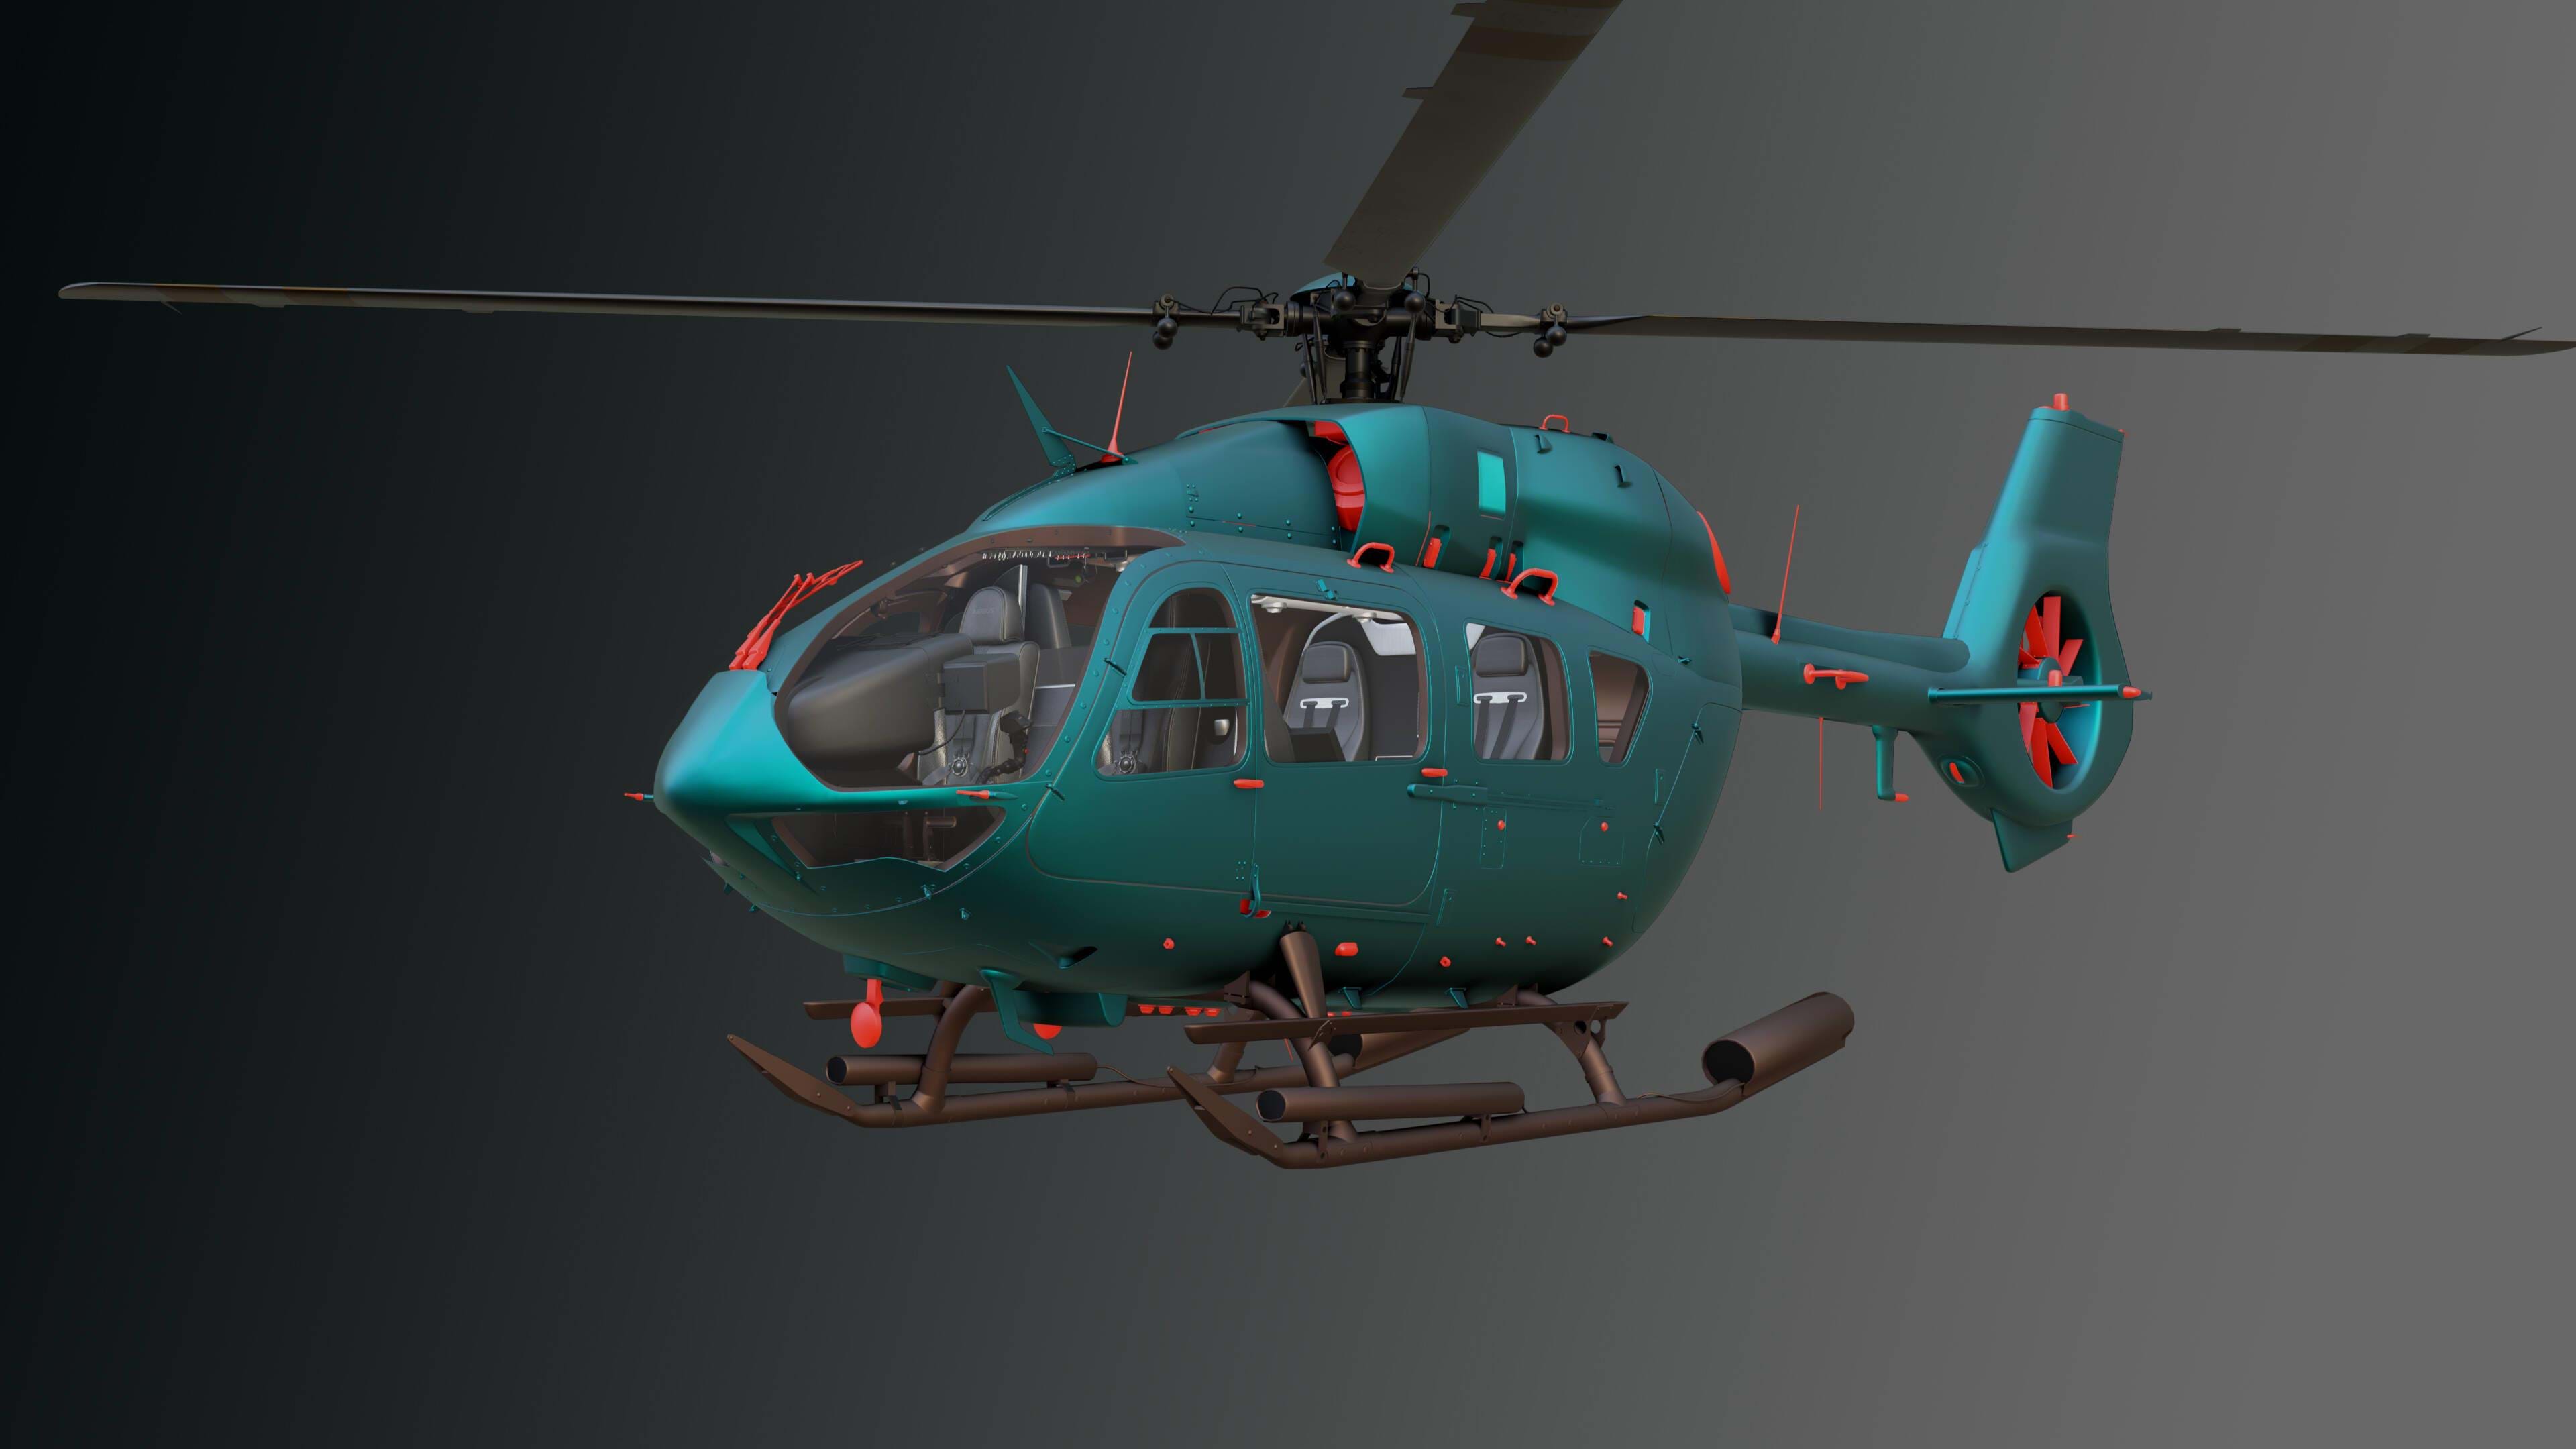 HPG released first development update of the H145 for MSFS